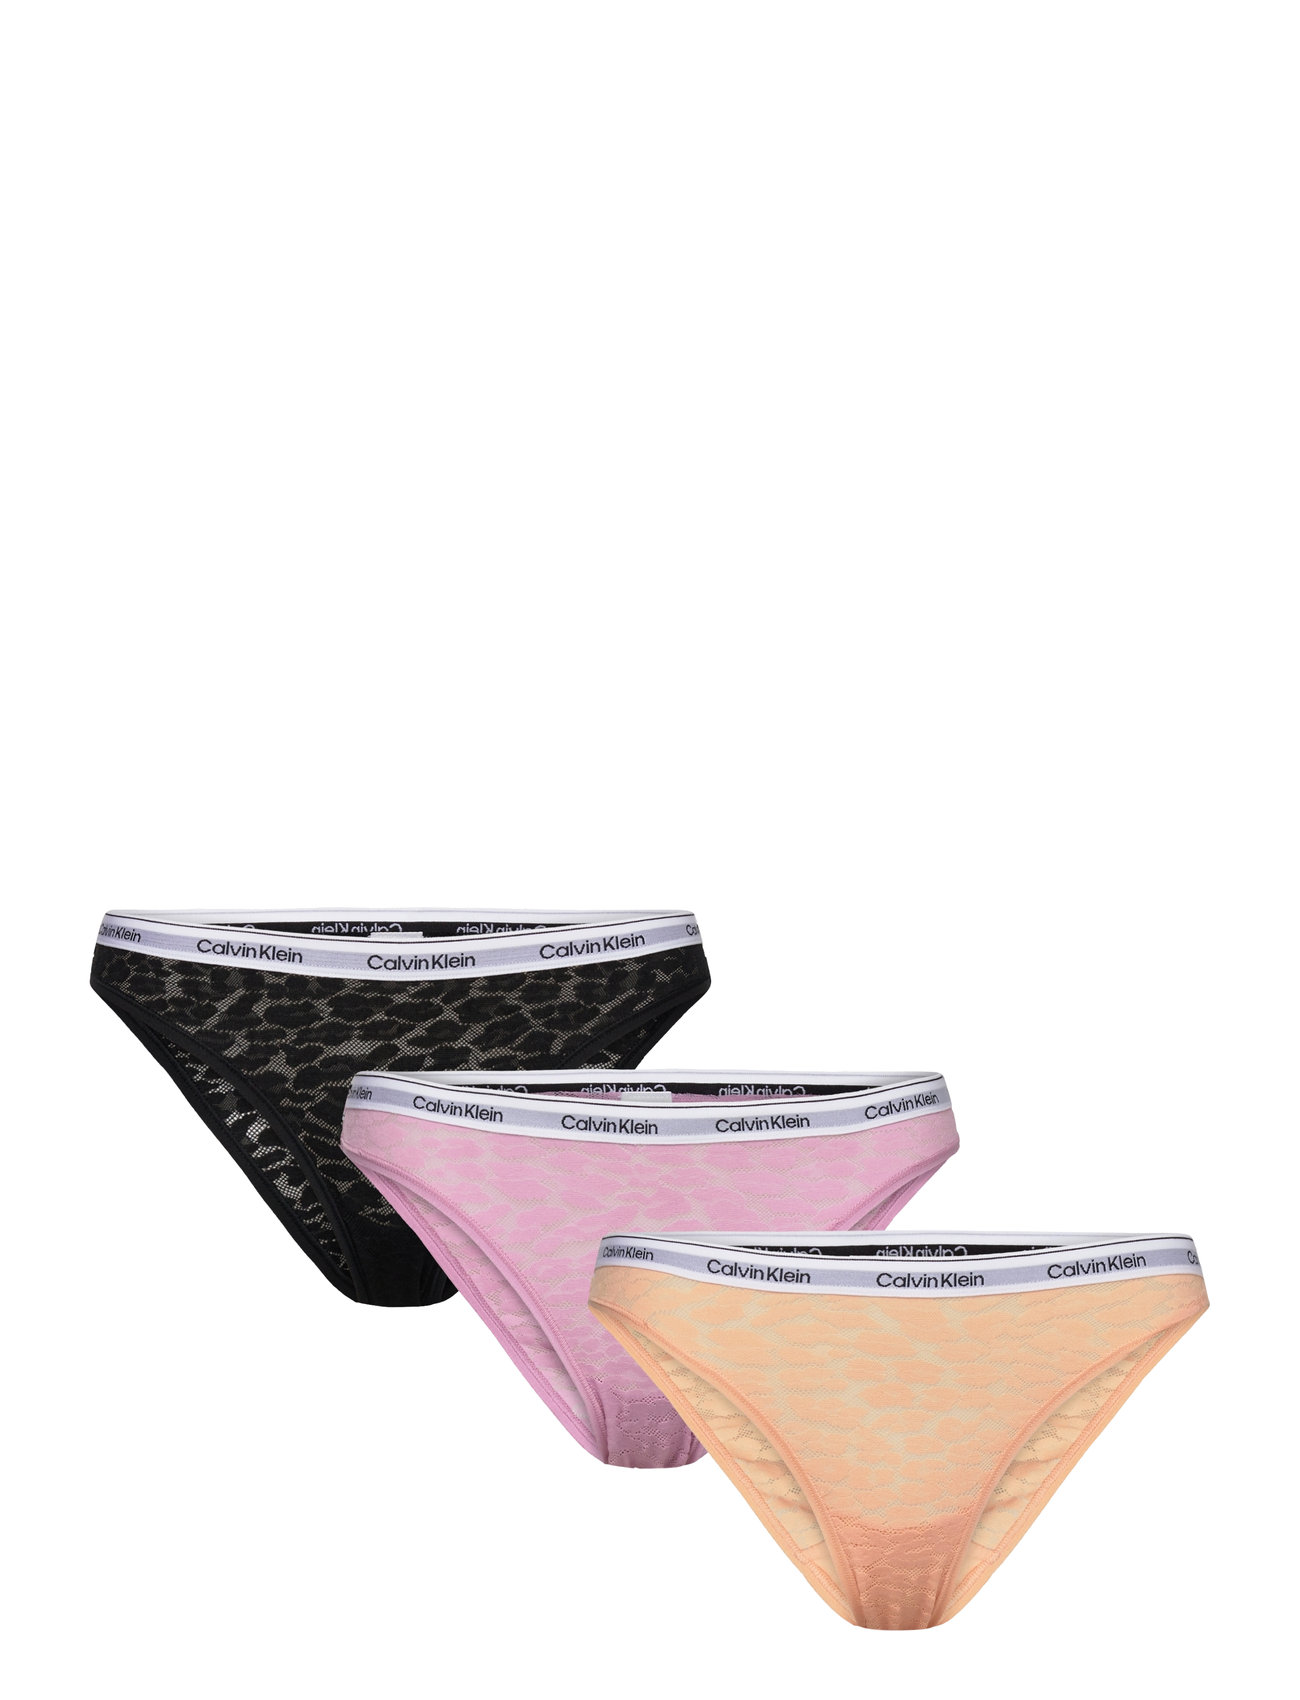 Boozt Days - Briefs for women - Trendy collections at